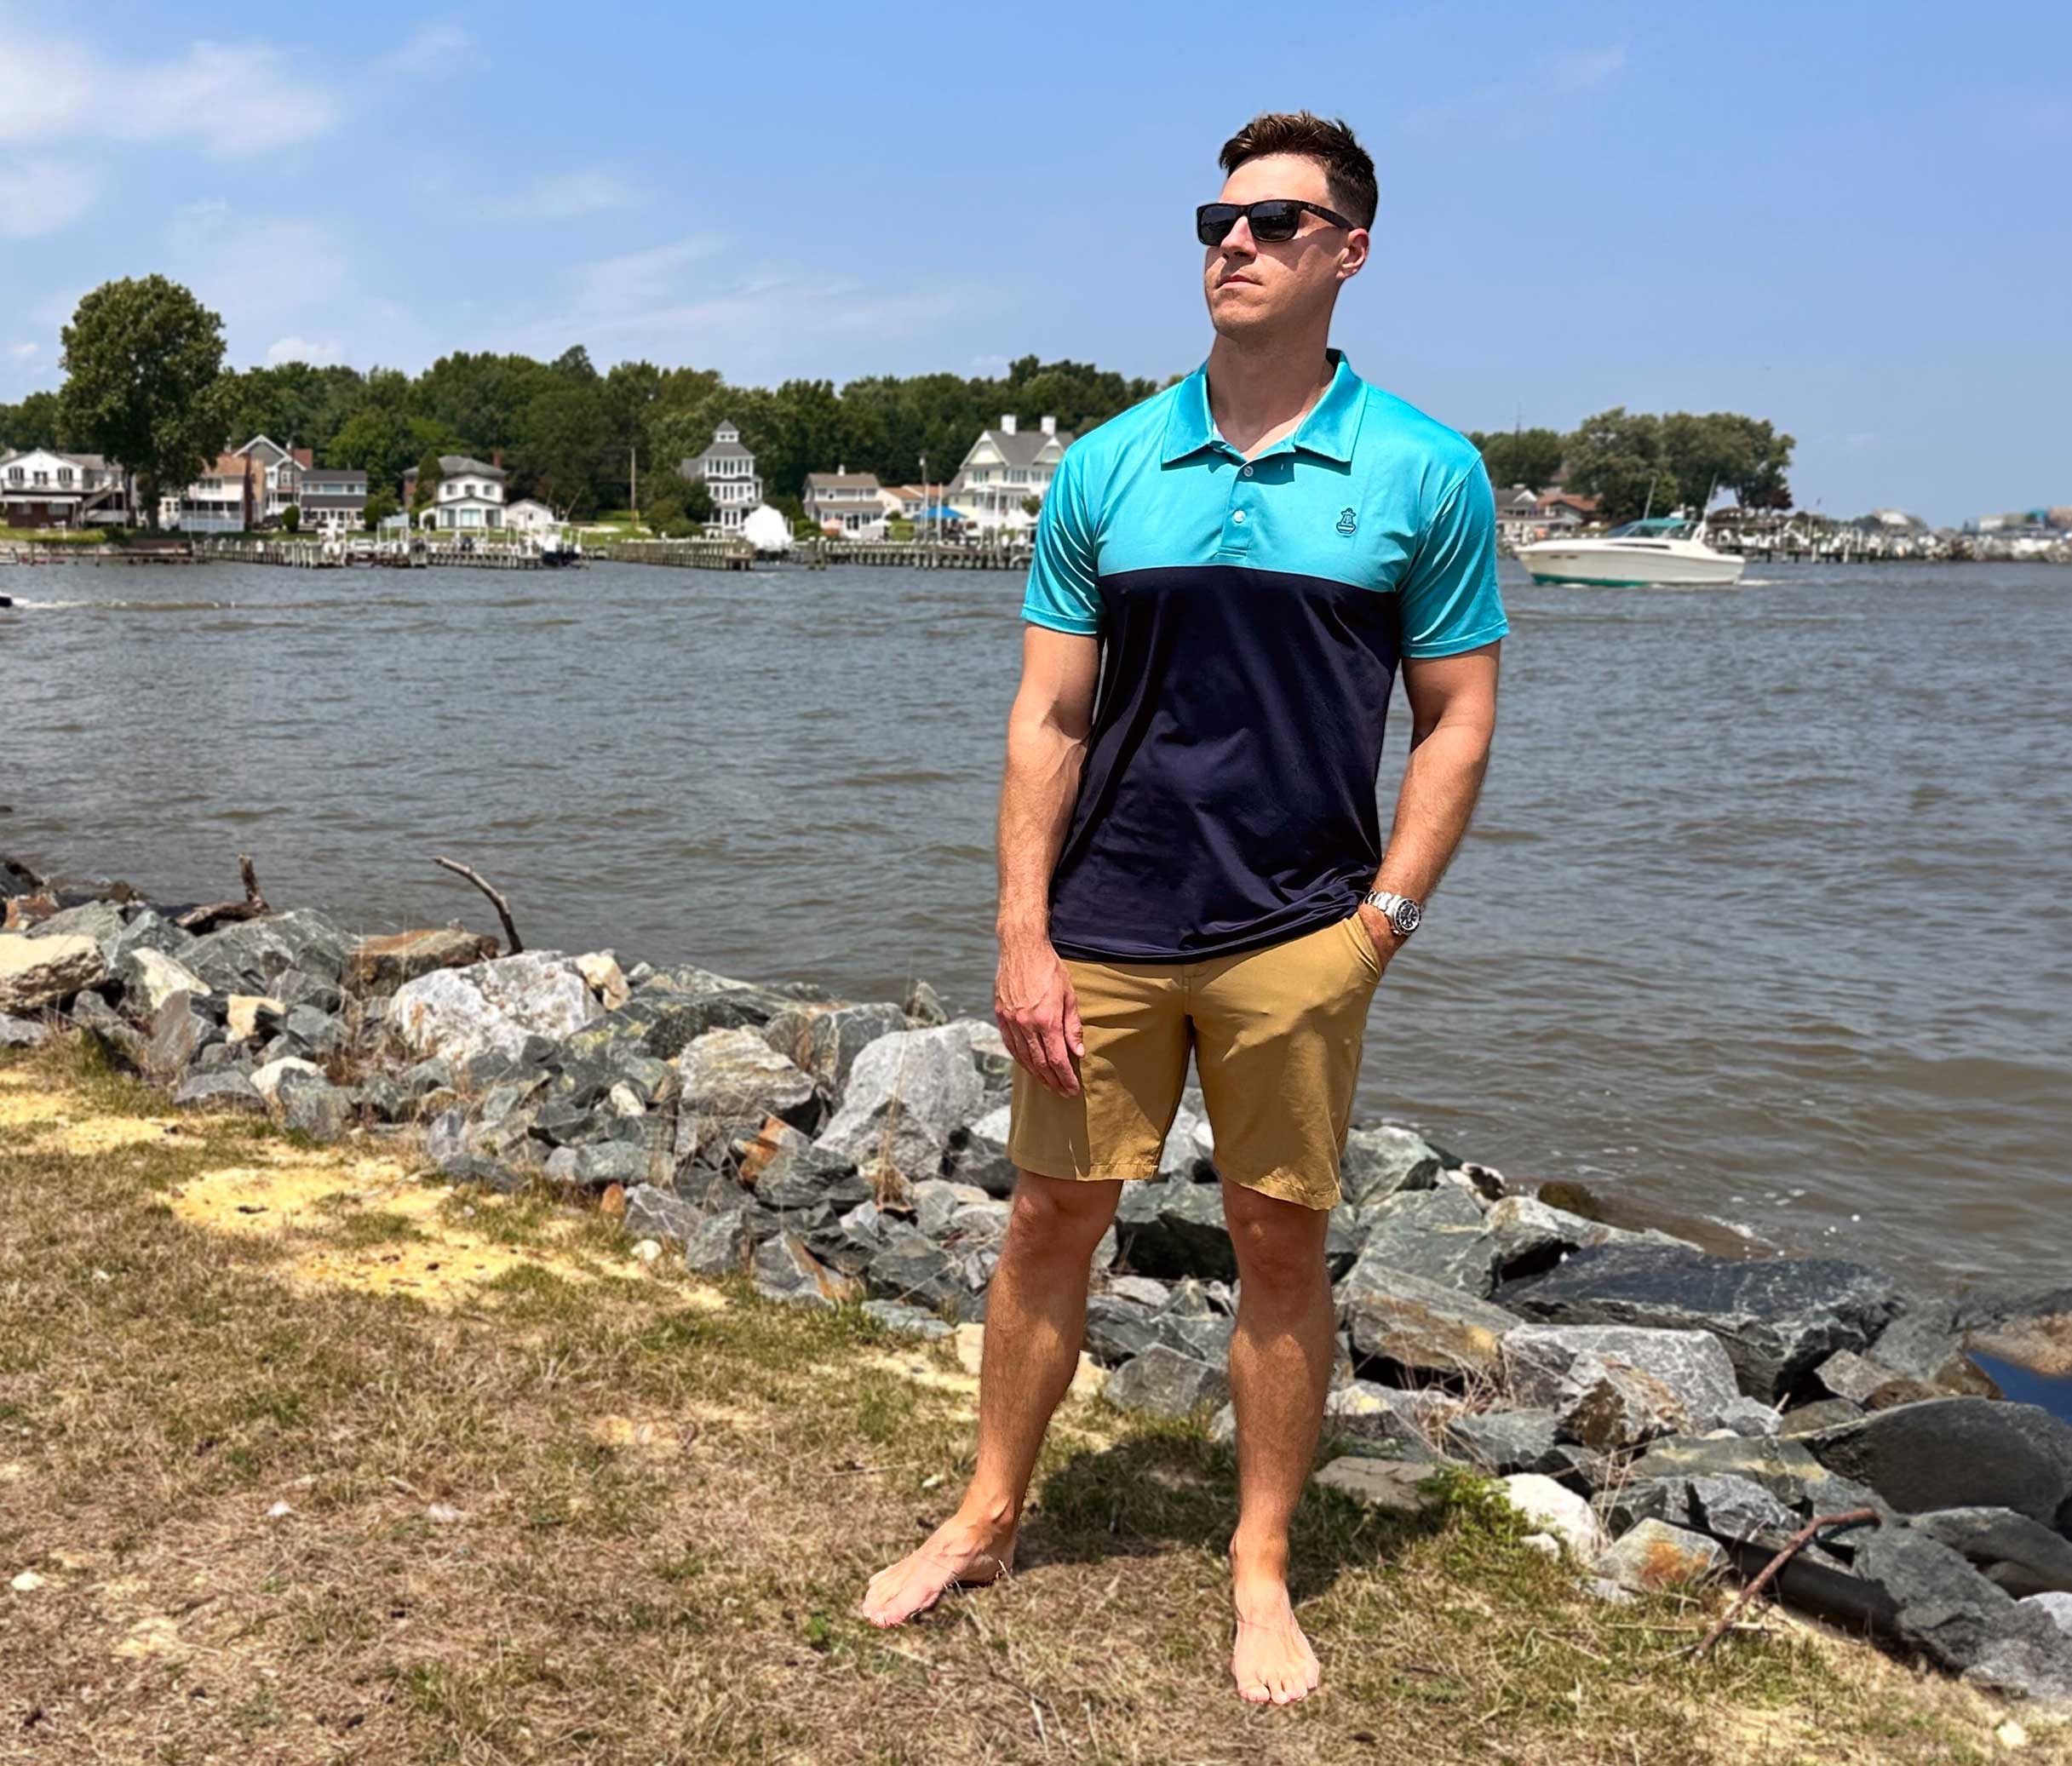 Man in blue polo shirt and sunglasses standing on the grass in front of a lake